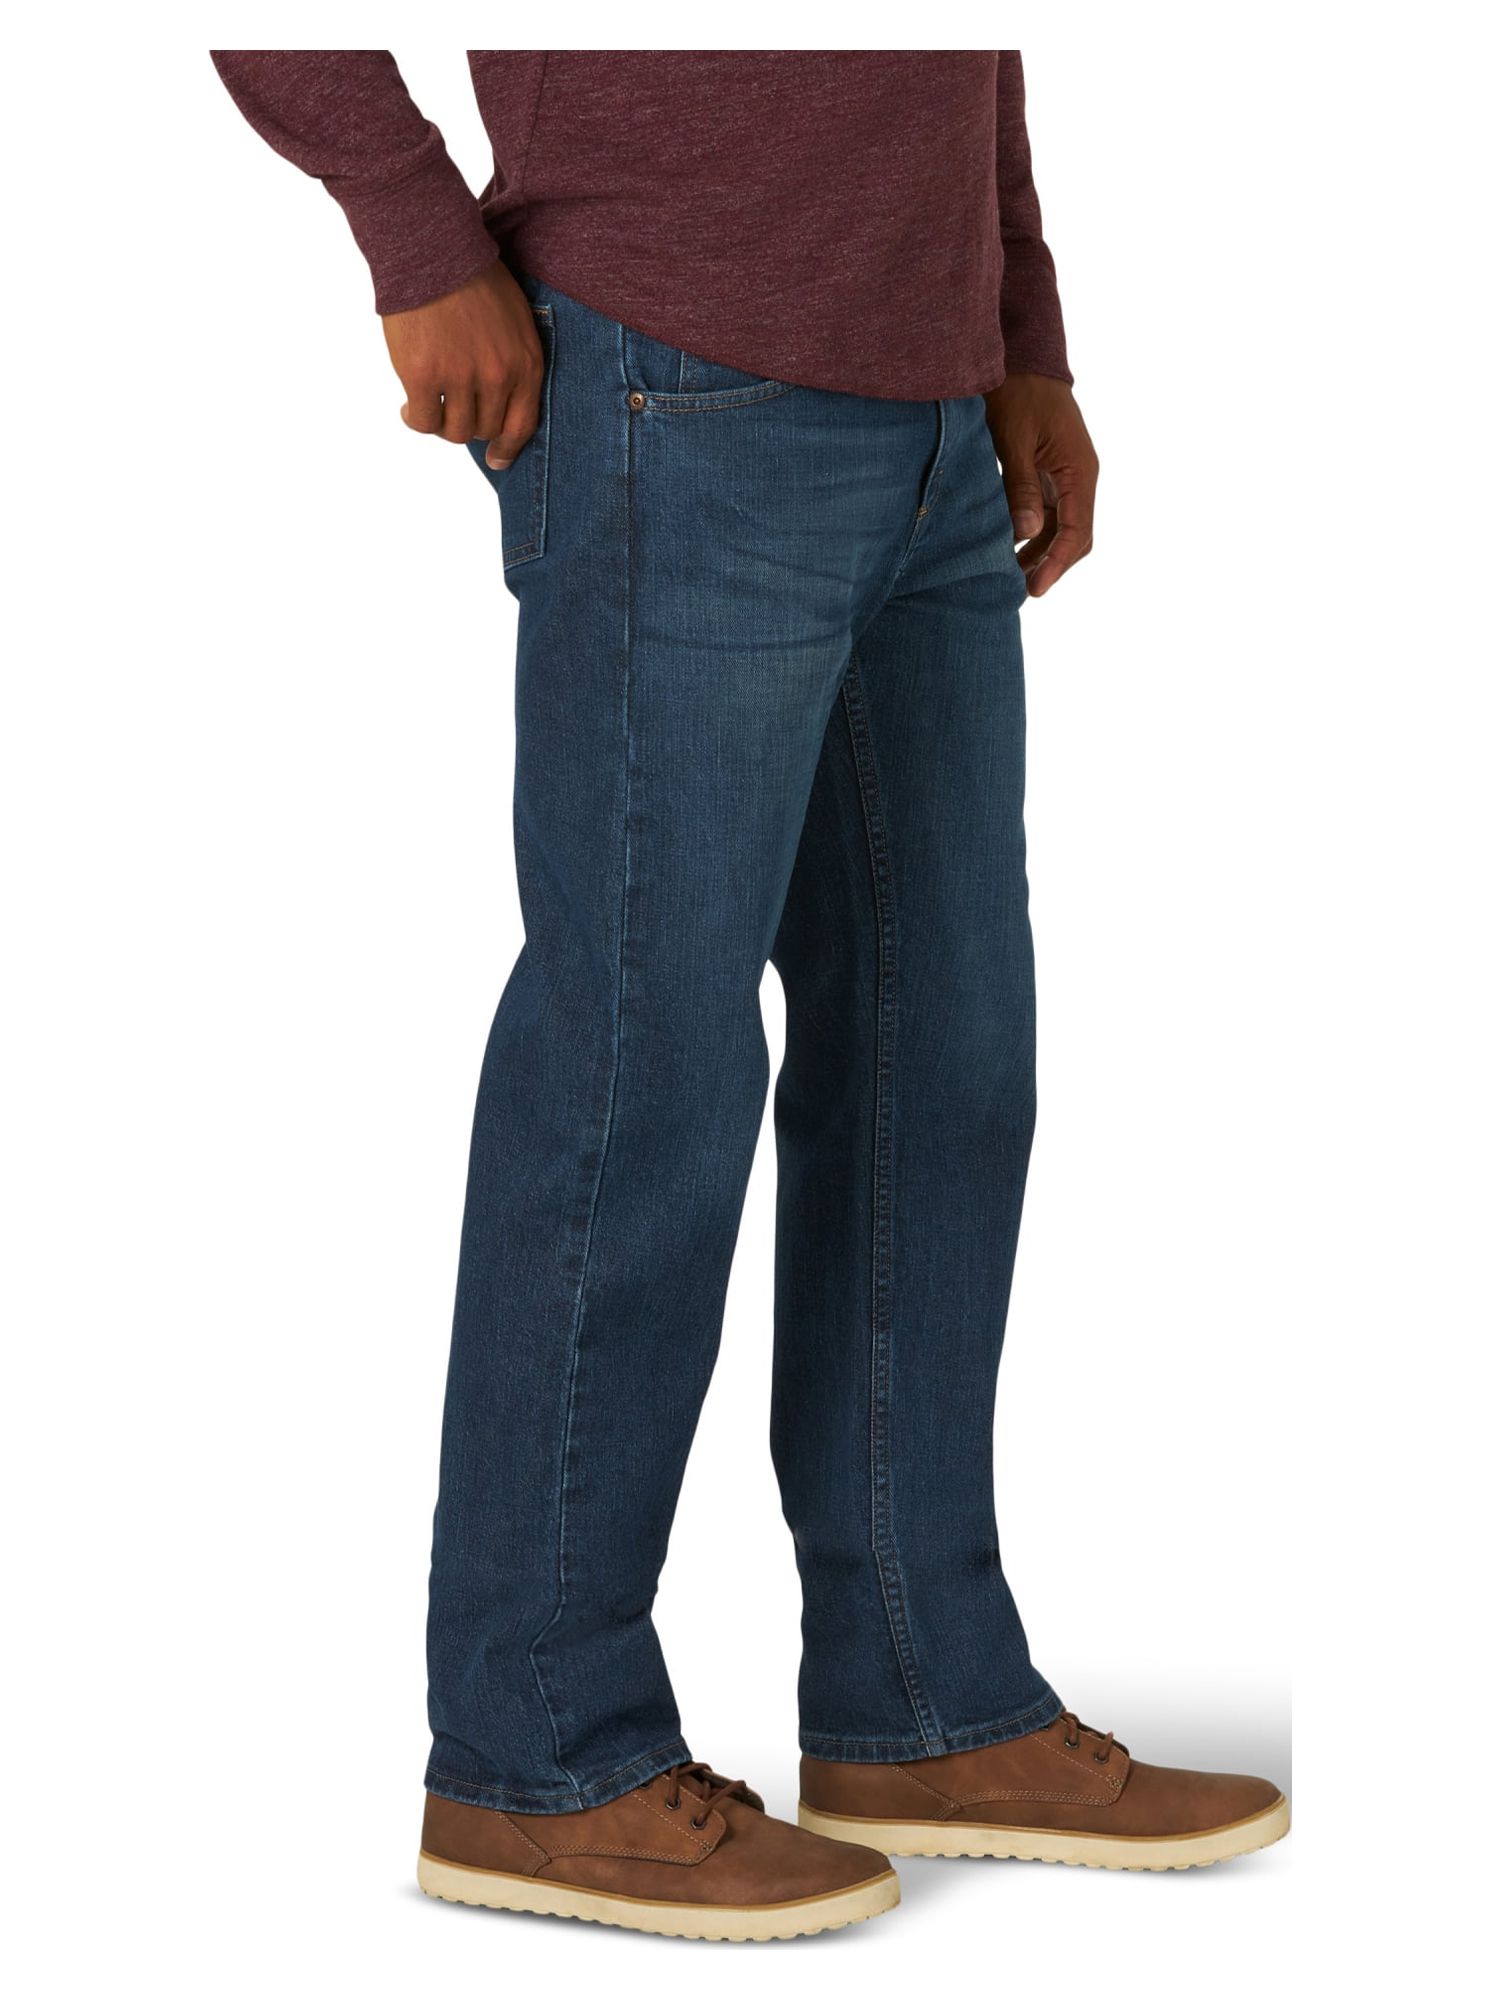 Wrangler Men's and Big Men's Relaxed Fit Jeans with Flex - image 4 of 8